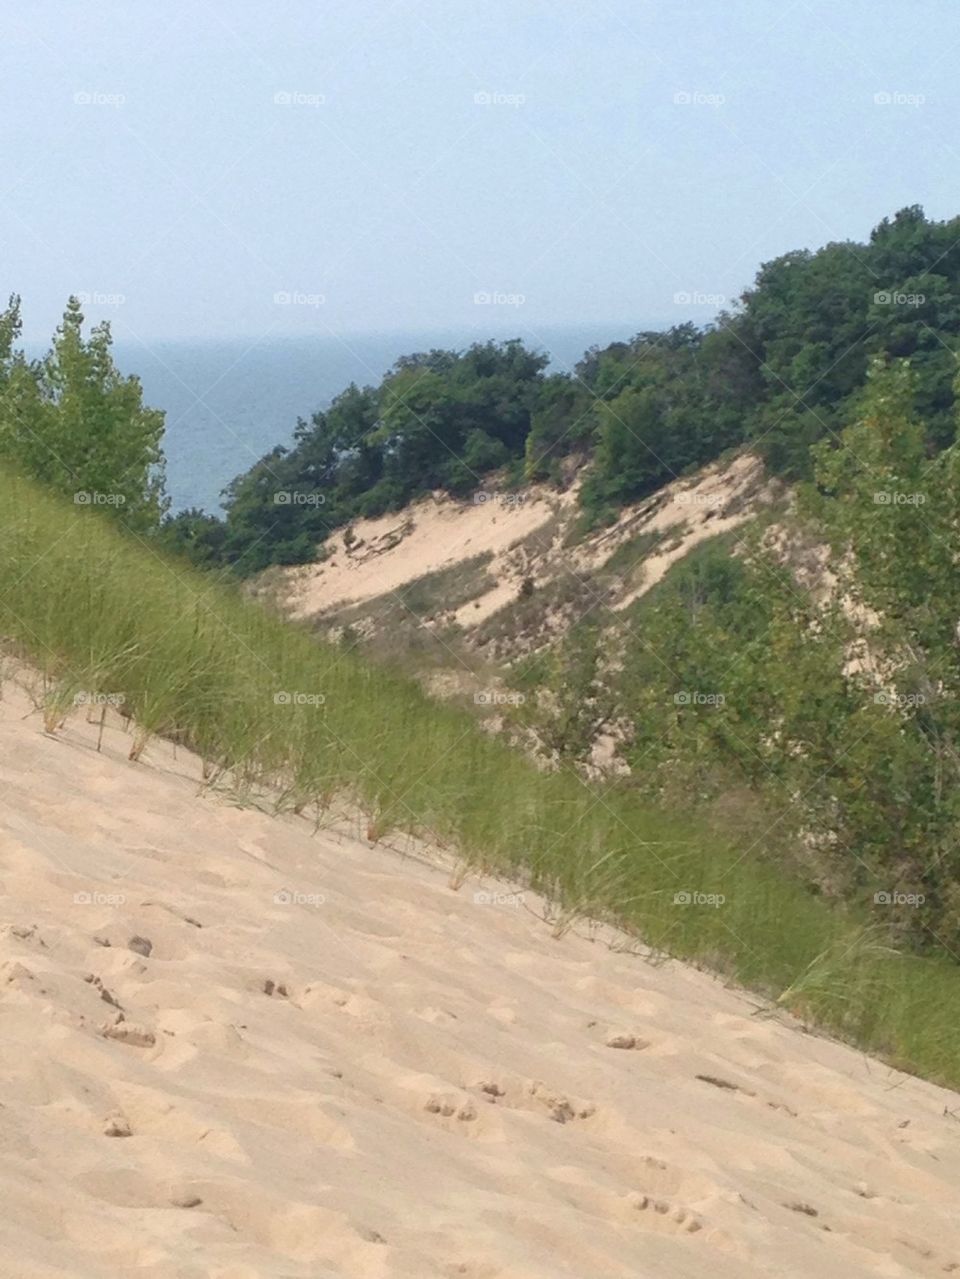 Dunes, Dunes, and a Lake